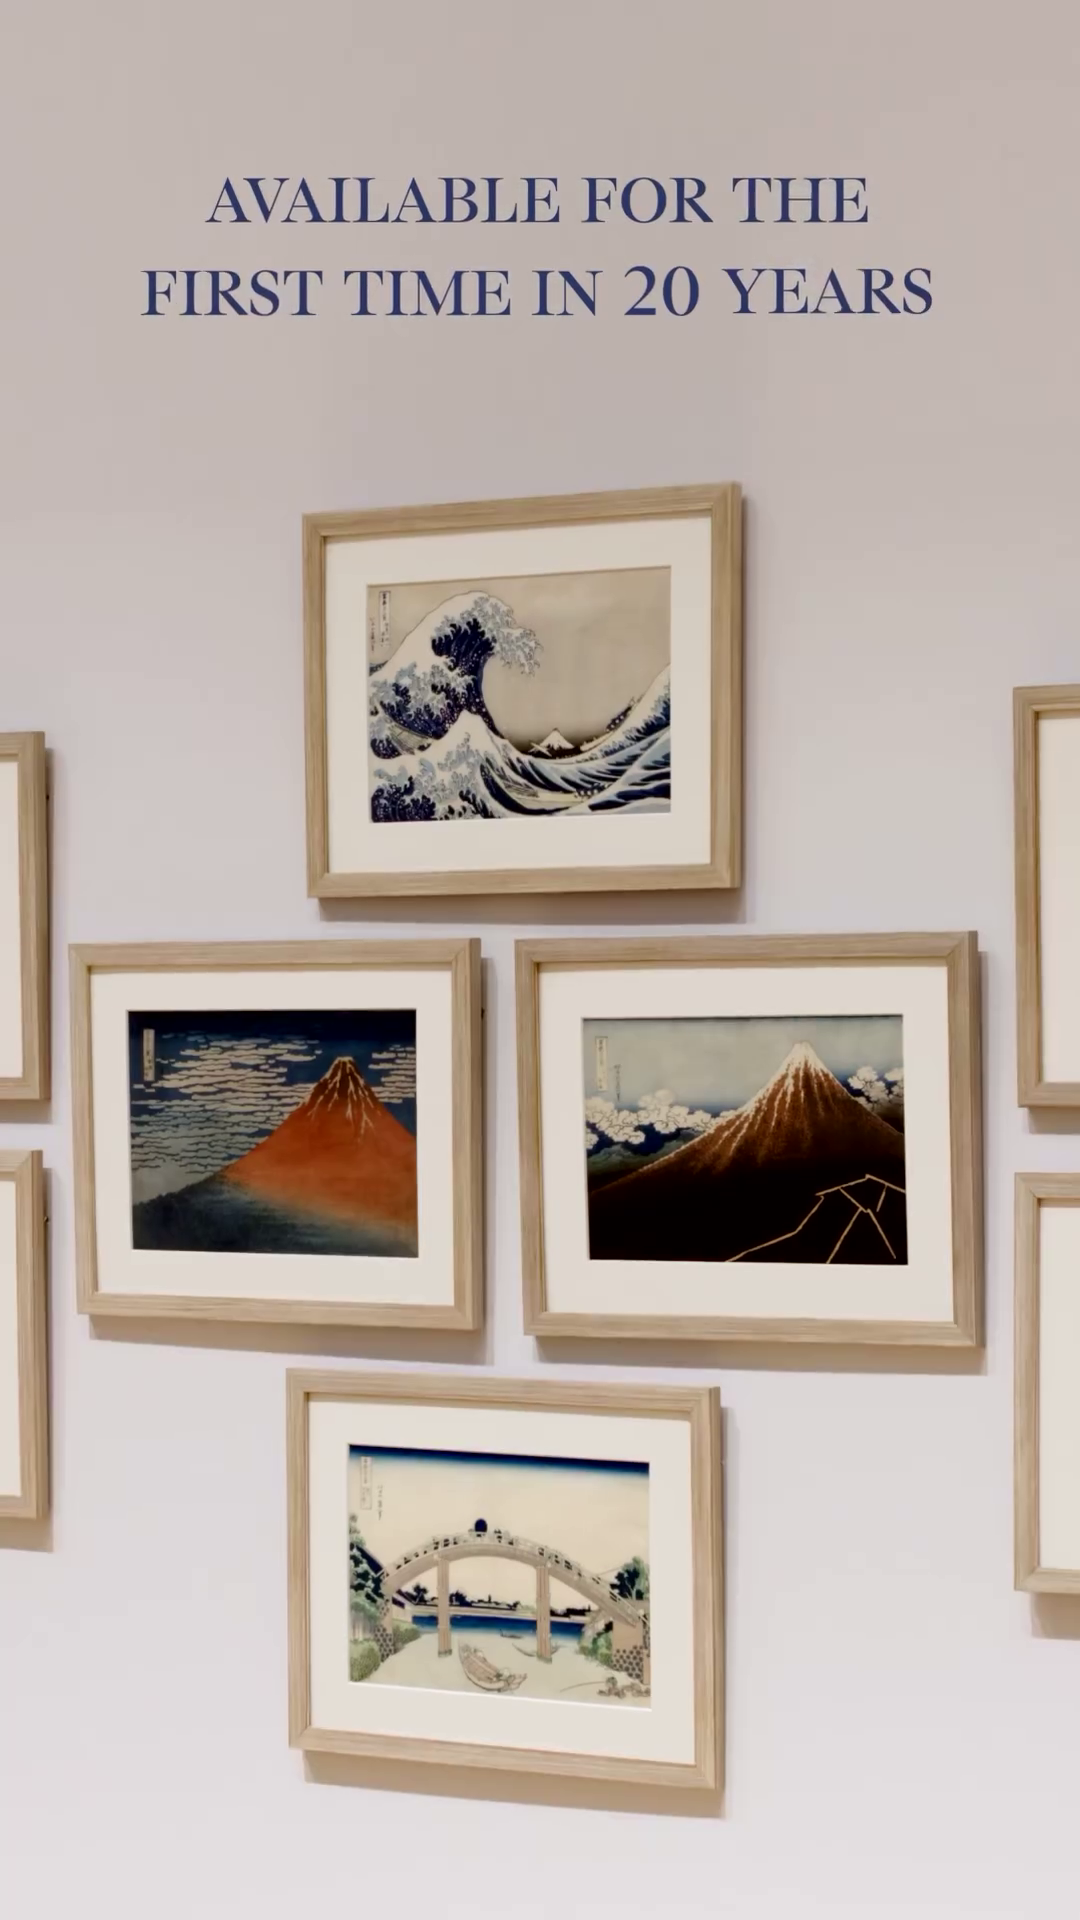 A complete set of Hokusai's 36 Views of Mount Fuji is available for the first time in 20 years